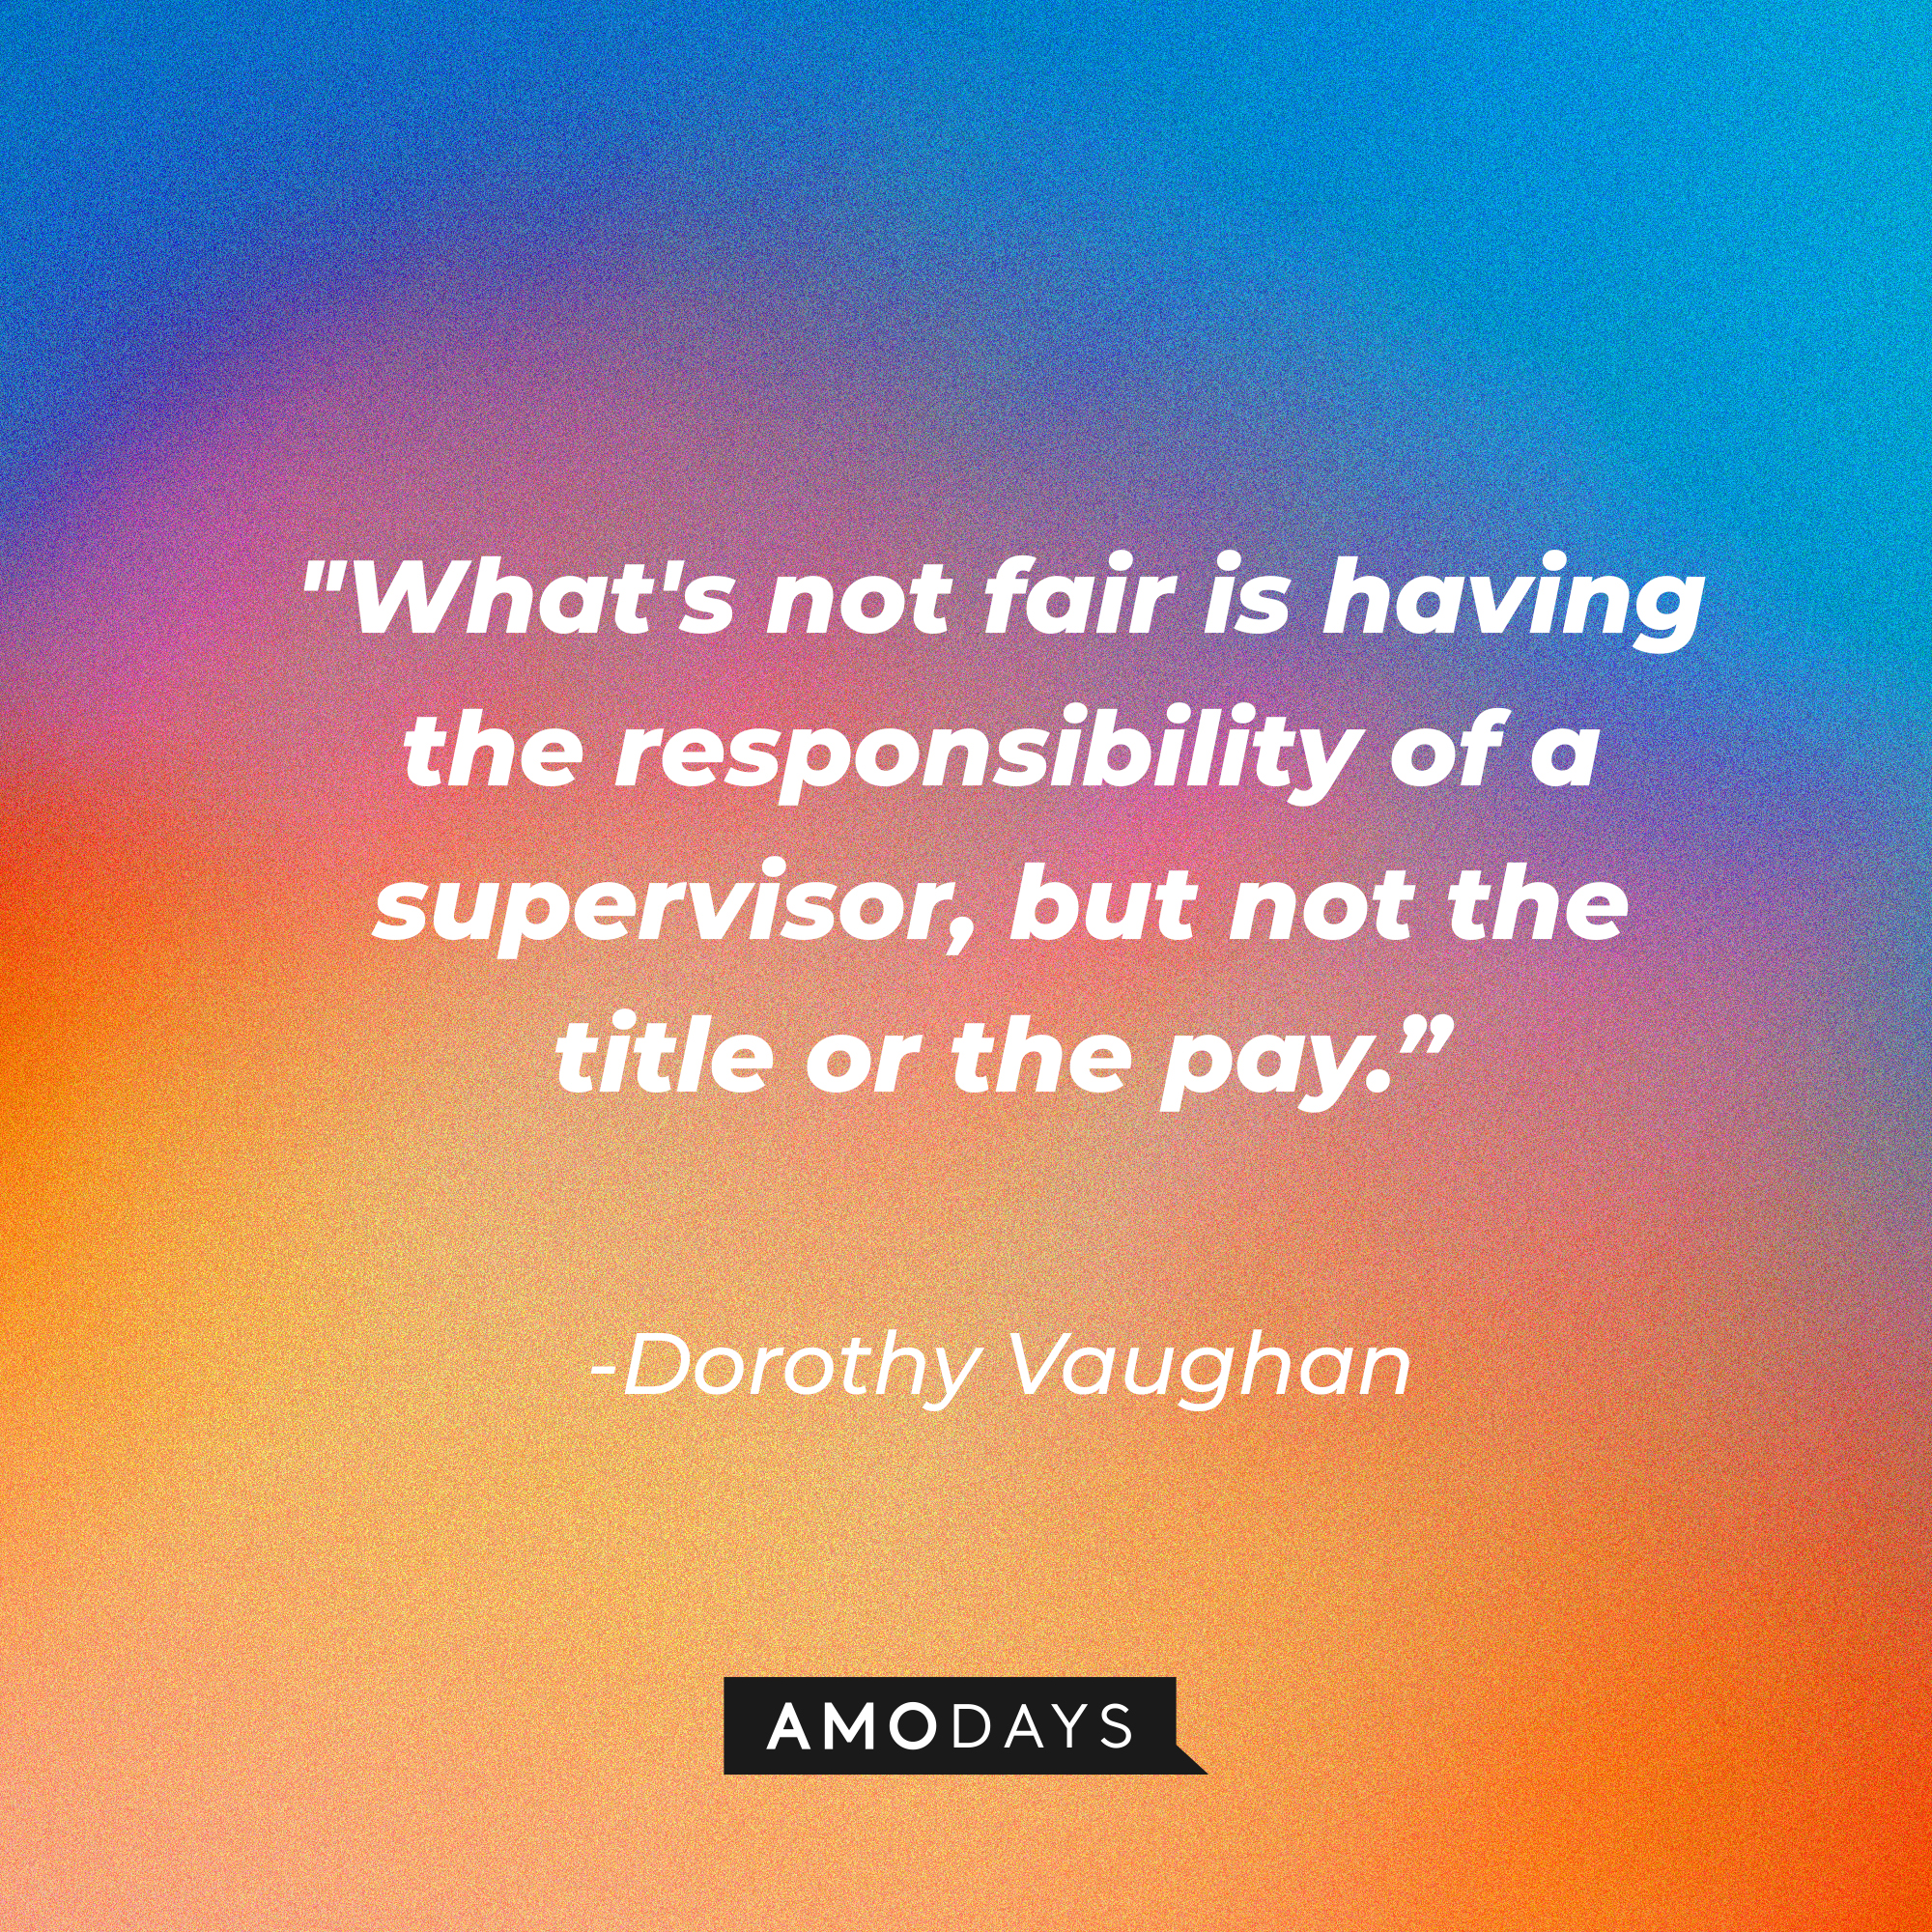 Dorothy Vaughan's quote: "What's not fair is having the responsibility of a supervisor, but not the title or the pay.”  | Source: Amodays